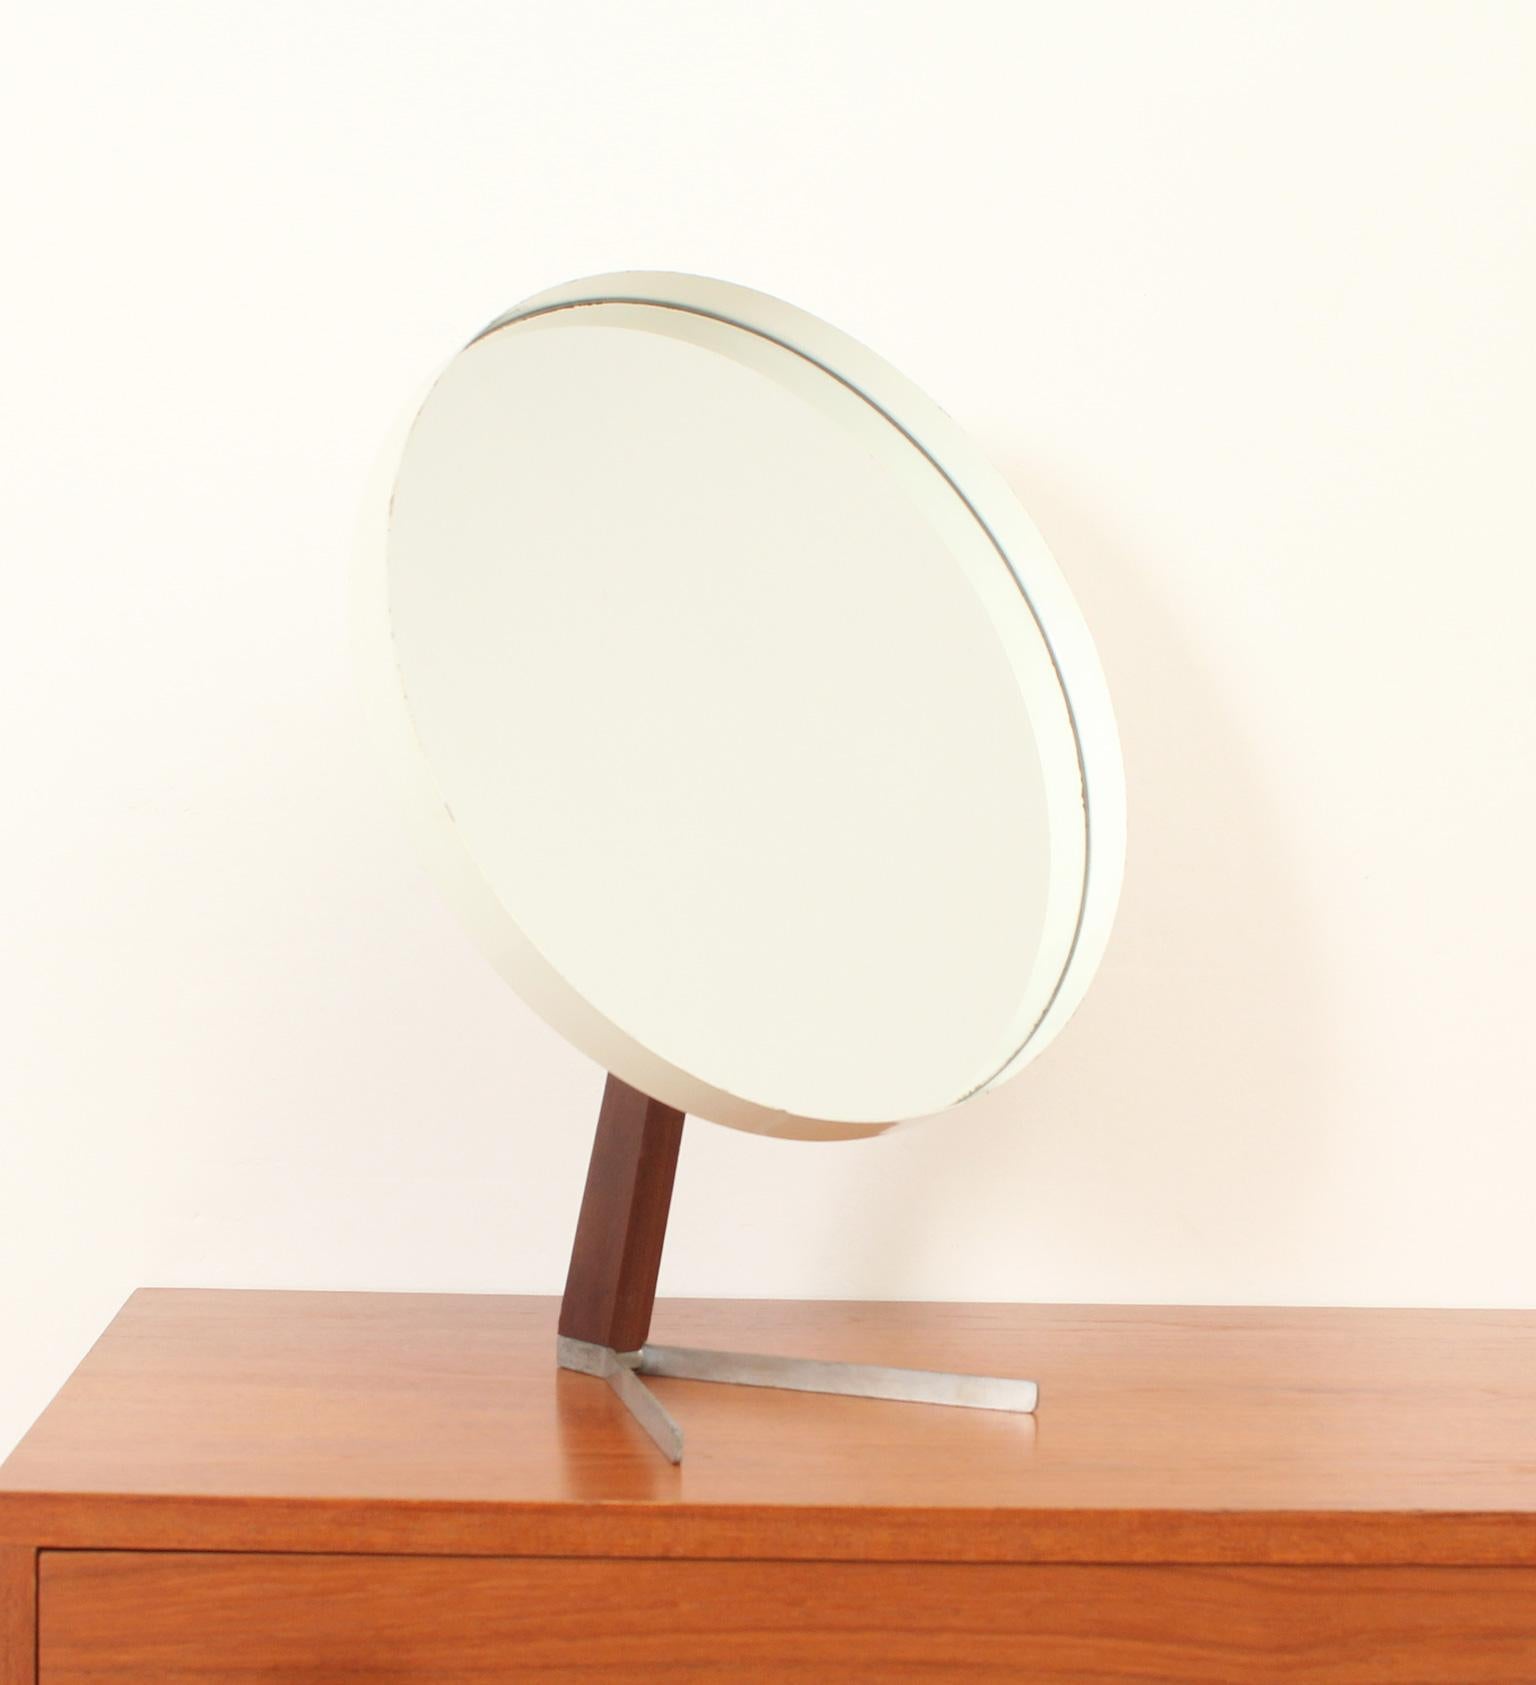 Table mirror designed by Robert Welch for Durlston Designs, United Kingdom, 1960s. Mirror with lacquered metal frame with adjustable base in teak wood and steel.